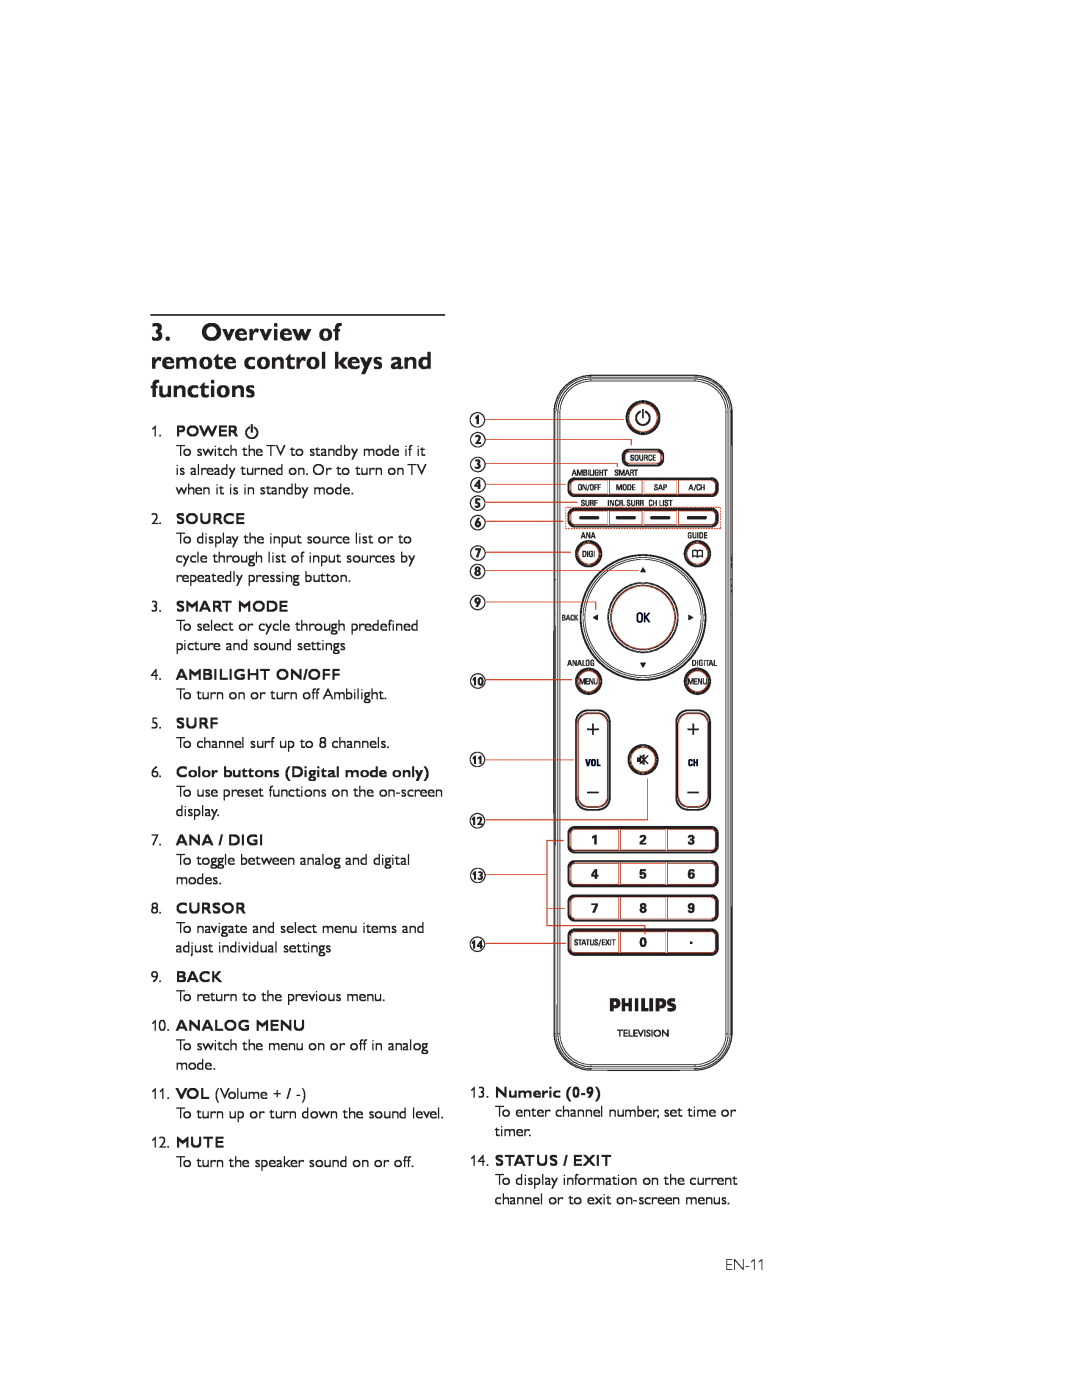 Philips 52PFL7803D Overview of remote control keys and functions, Power, Source, Smart Mode, Ambilight On/Off, Surf, Back 